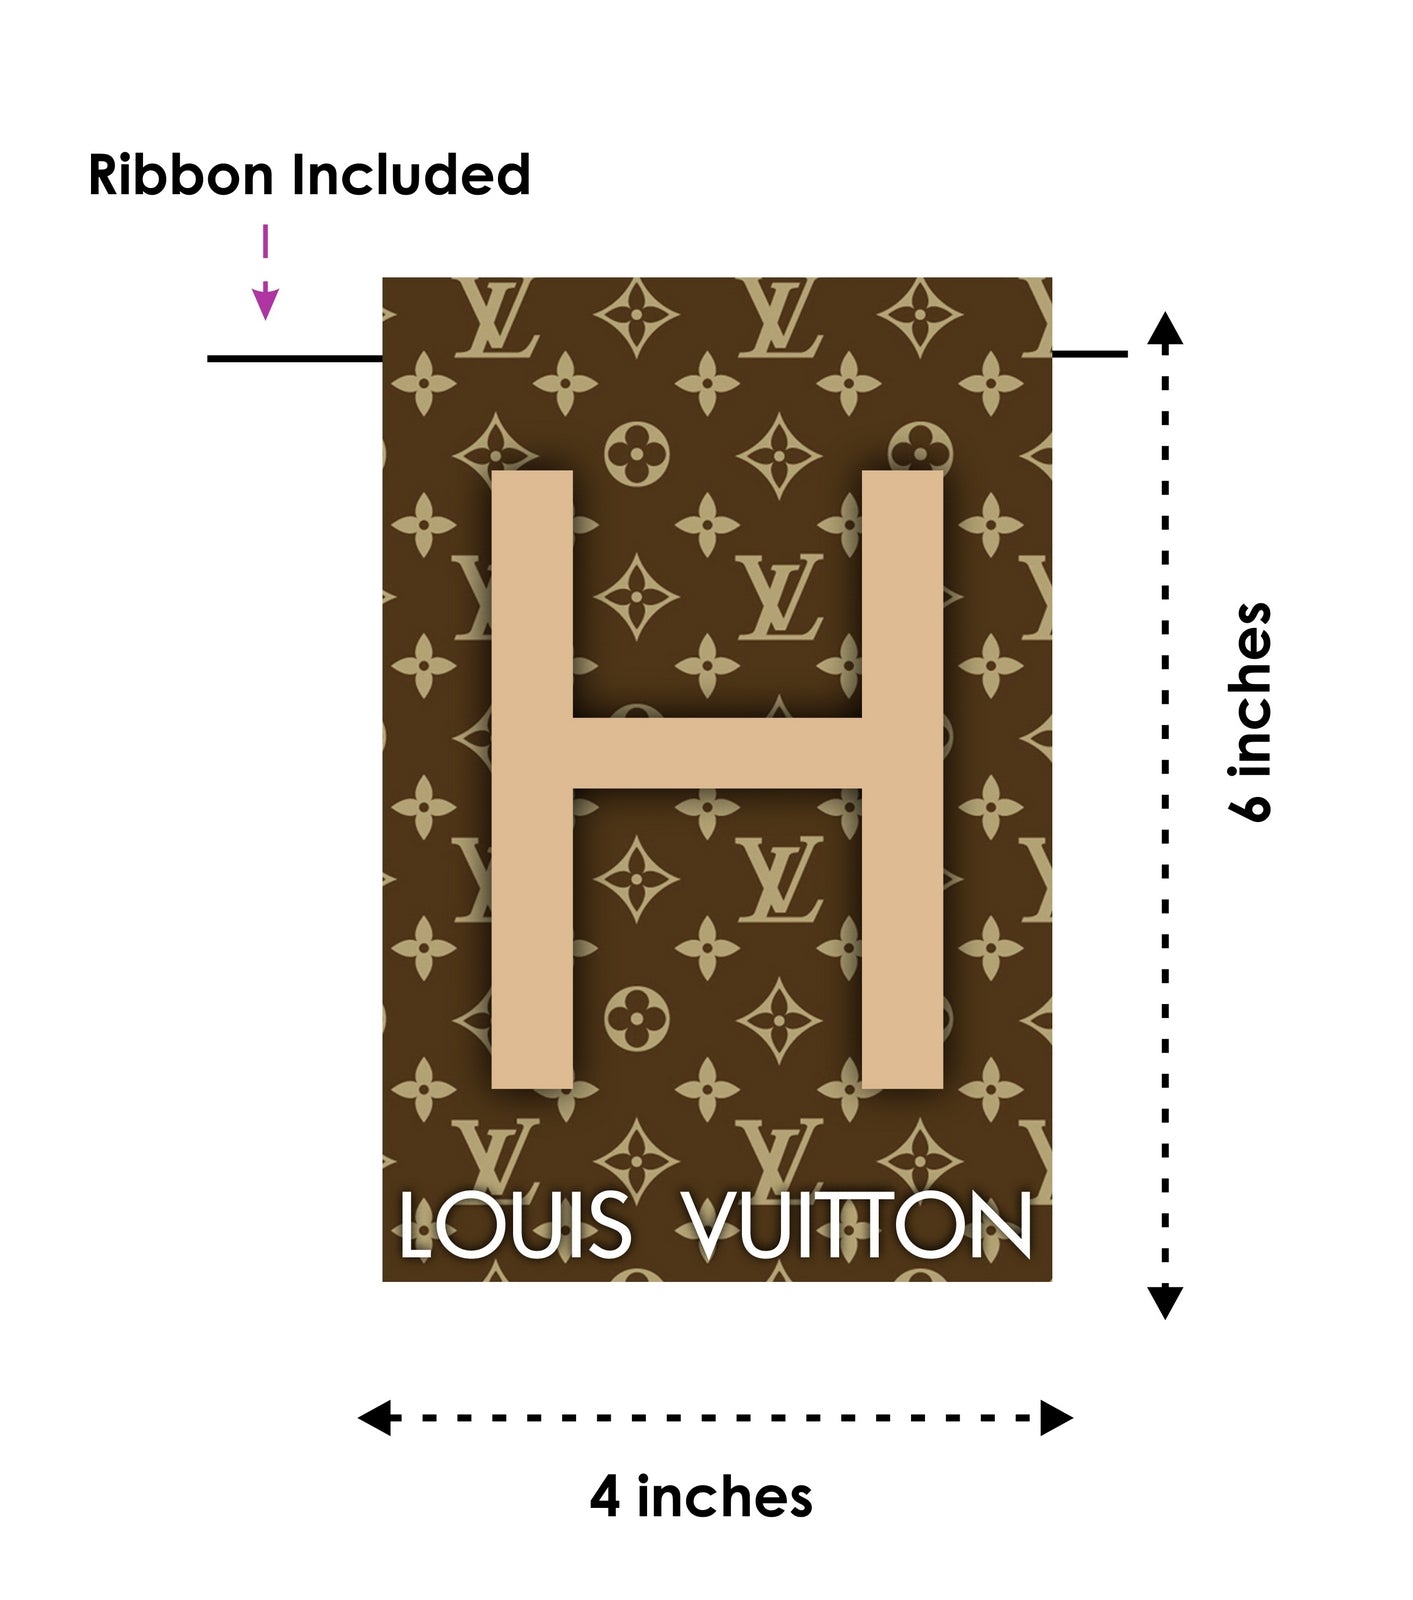 LV Theme Happy Birthday Decoration Hanging and Banner for Photo Shoot Backdrop and Theme Party